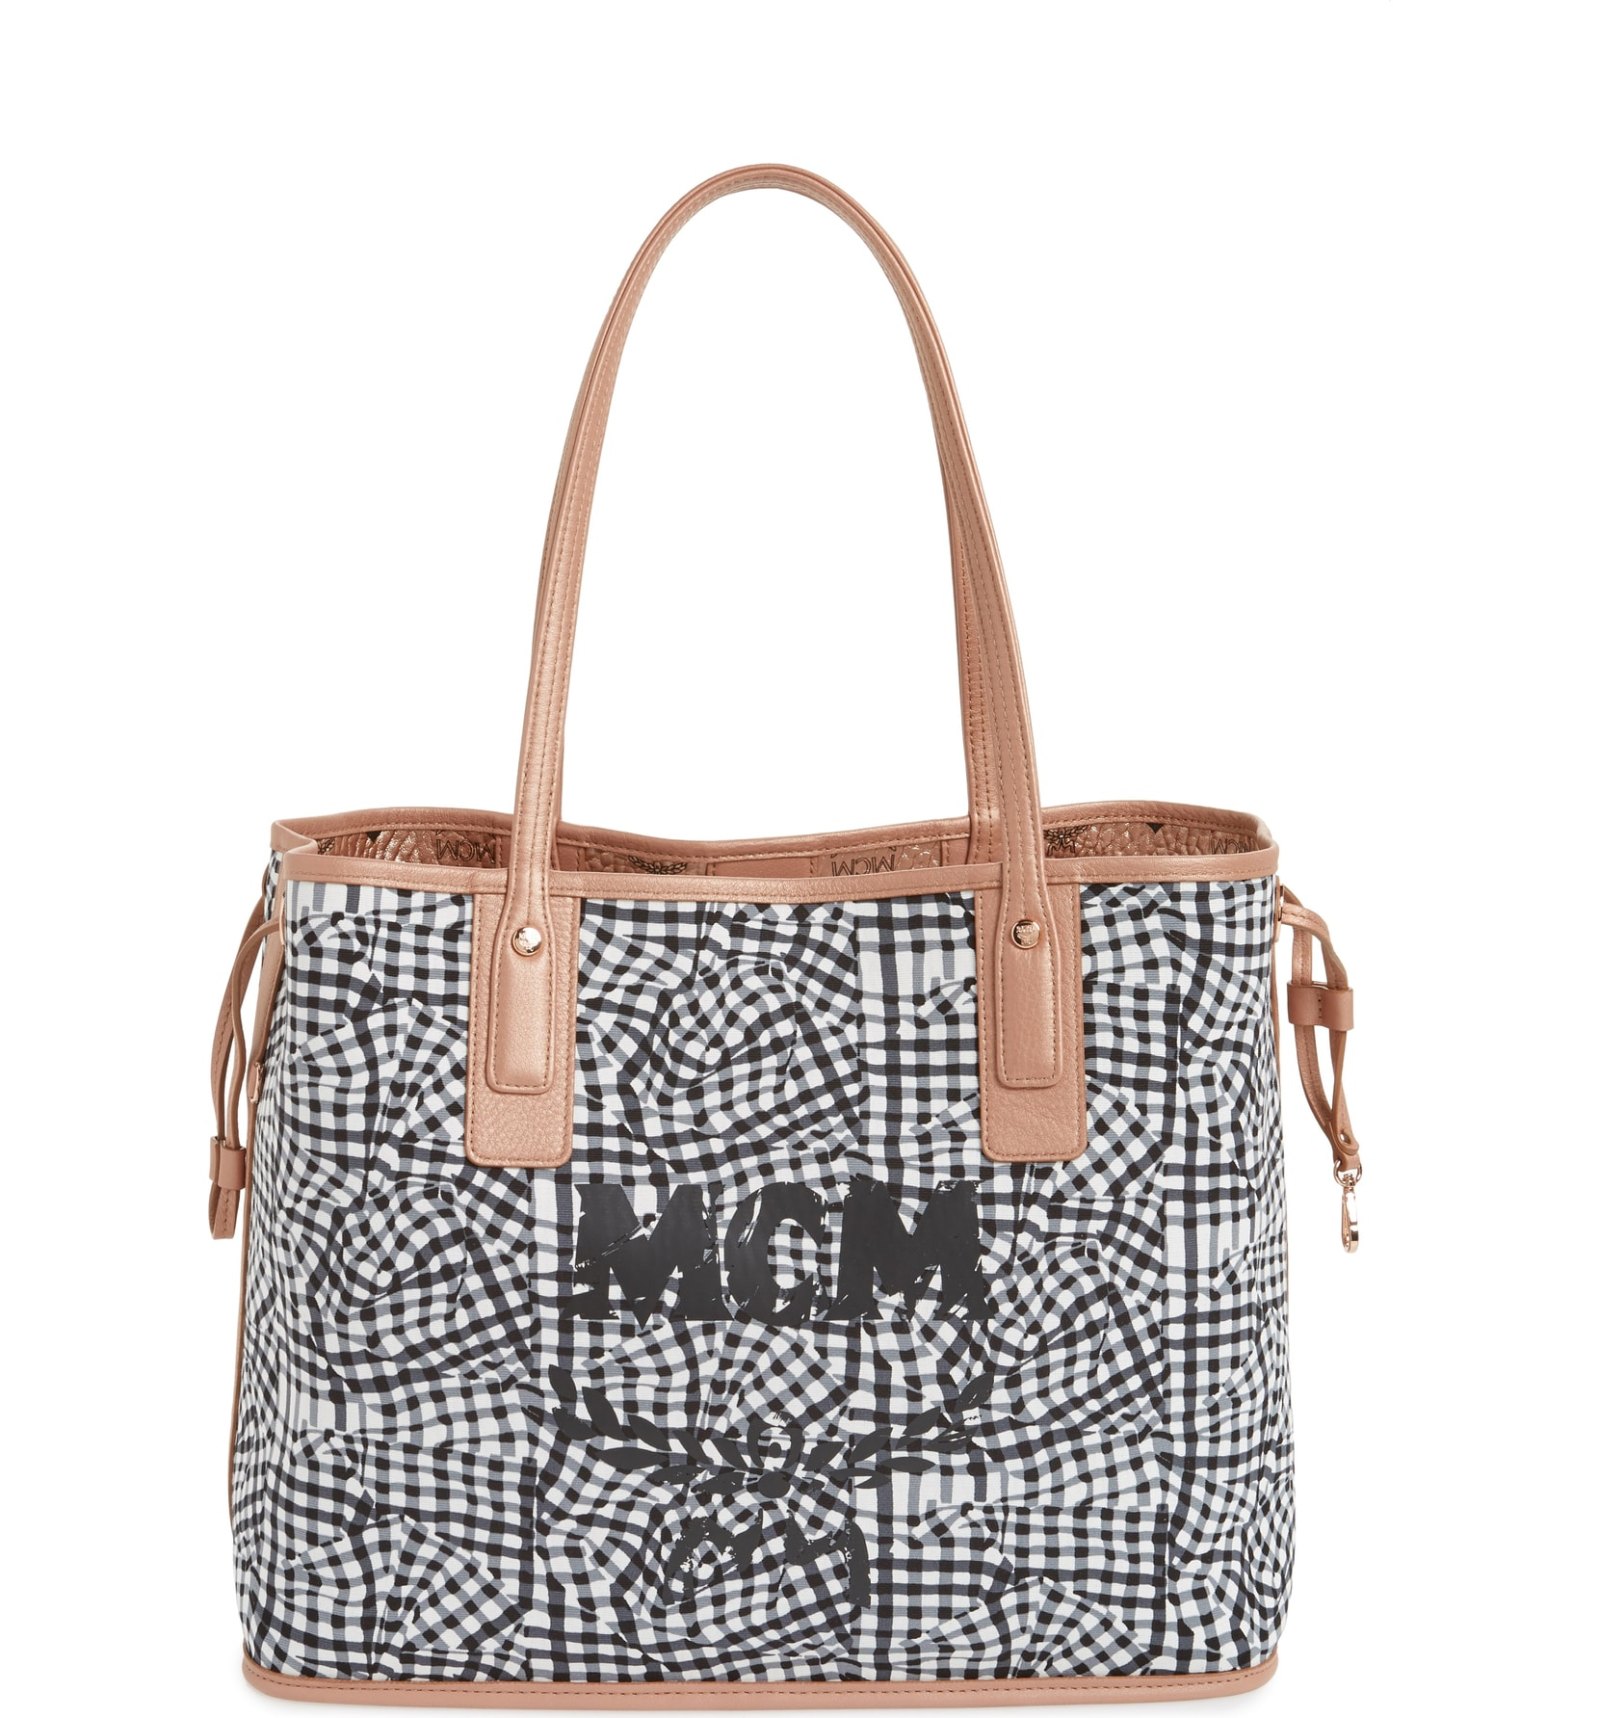 Shop the 5-Star MCM Reversible Designer Tote — Two Bags in One! | Us Weekly